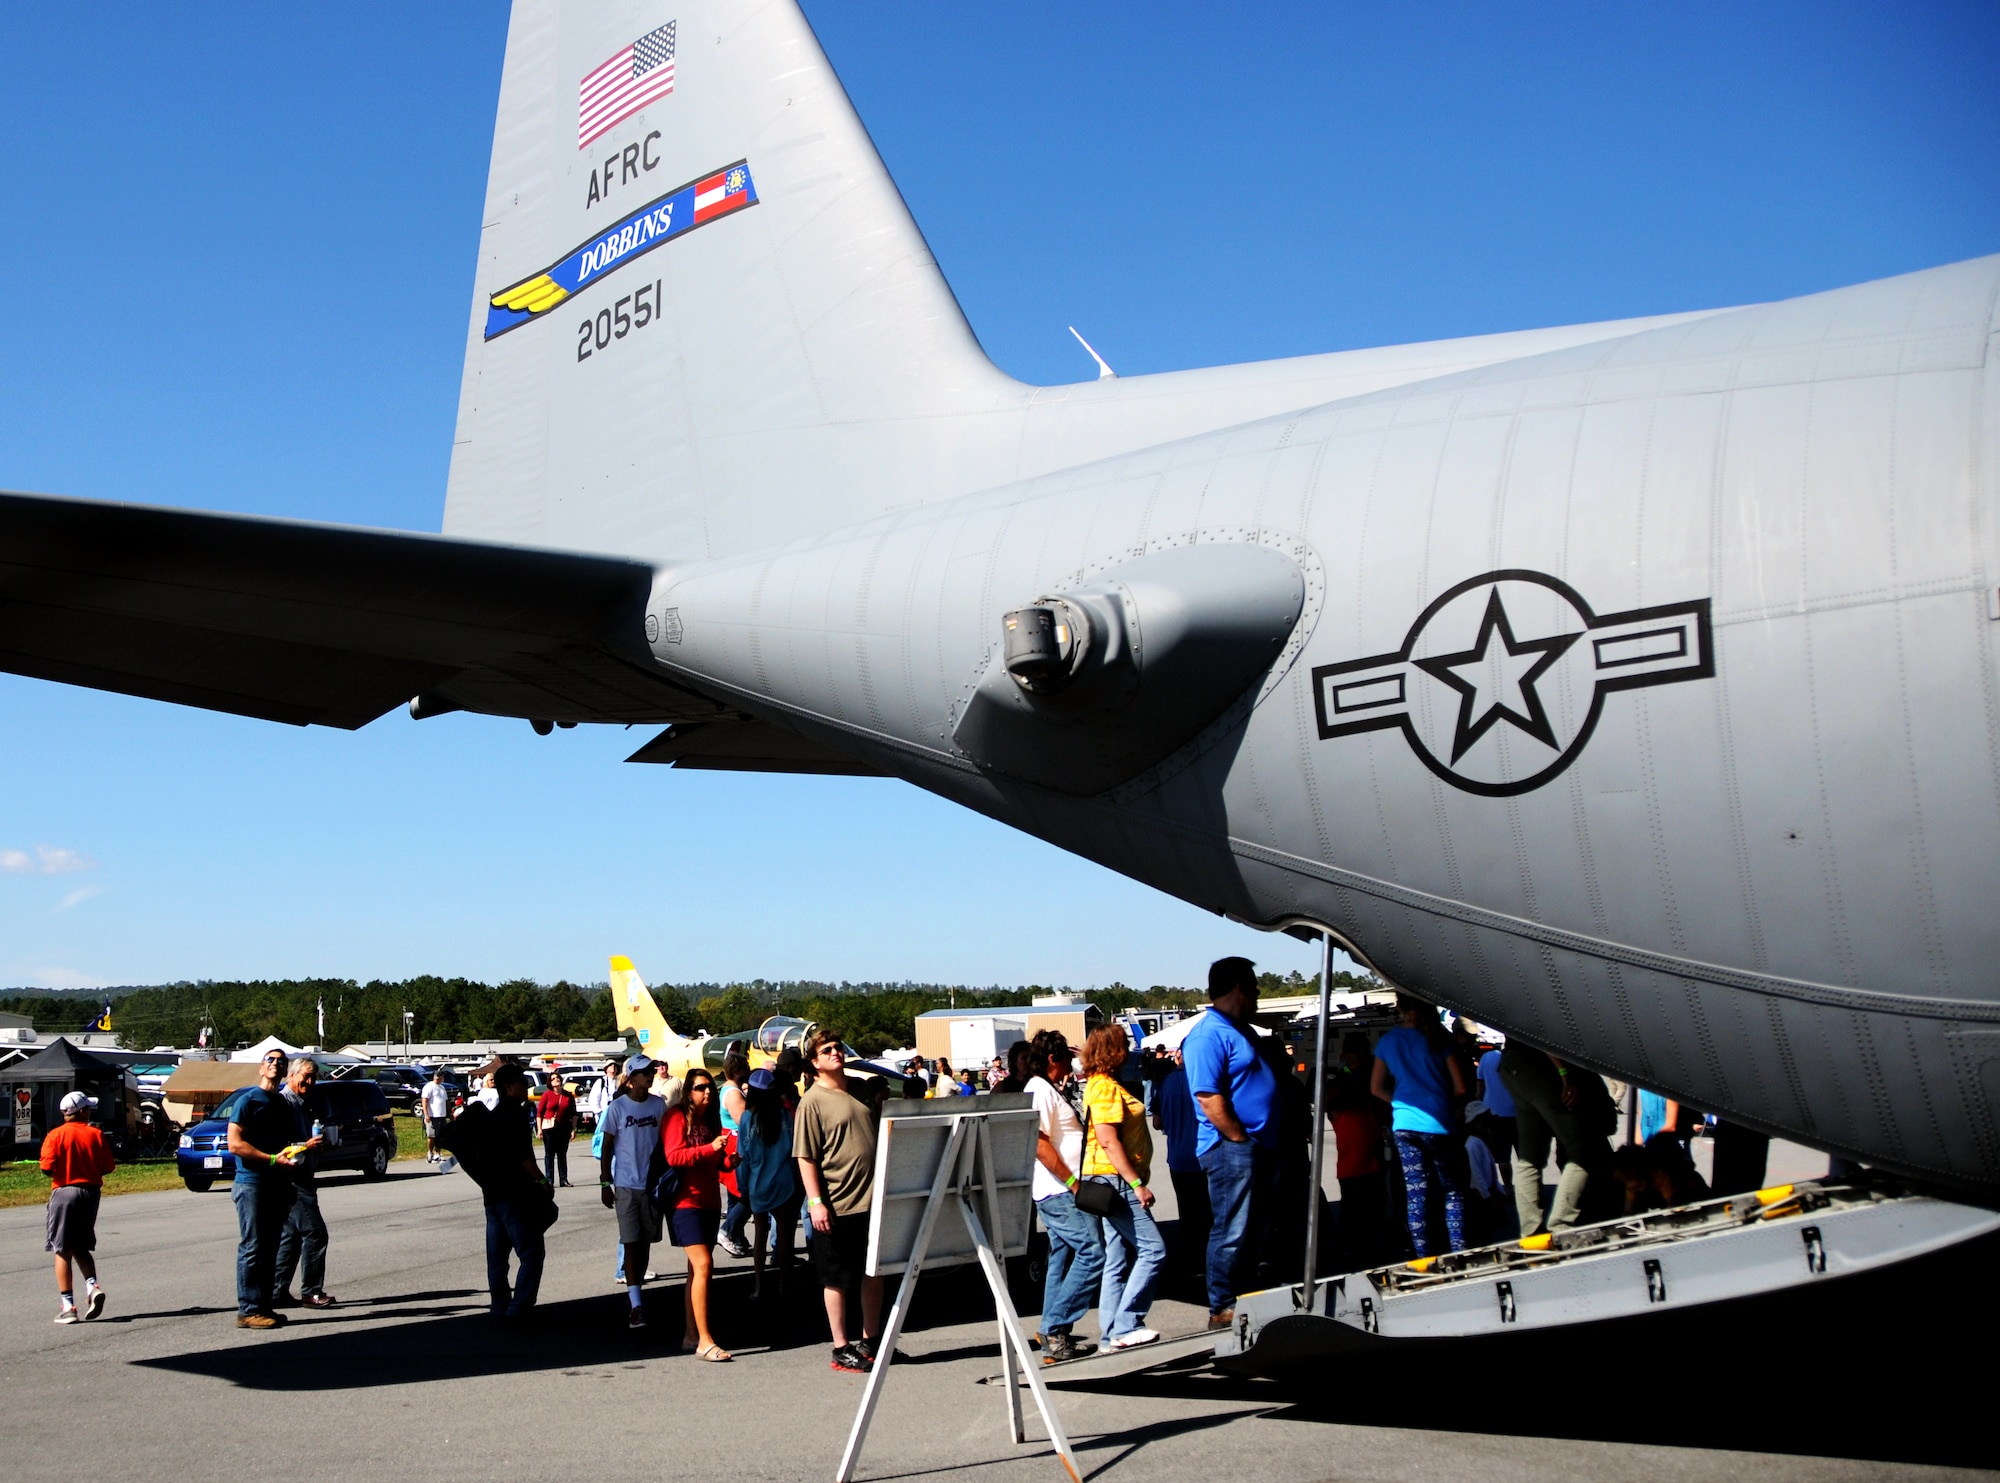 Visitors to the Wing over North Georgia air show line up to tour the bay area of a U.S. Air Force C-130 Hercules from Dobbins Air Reserve Base, Ga. at Rome, Ga., Oct. 18, 2014. The 700th Airlift Squadron brought a U.S. Air Force C-130 Hercules to the WONG air show as a static display. (U.S. Air Force photo by Senior Airman Daniel Phelps/Released)